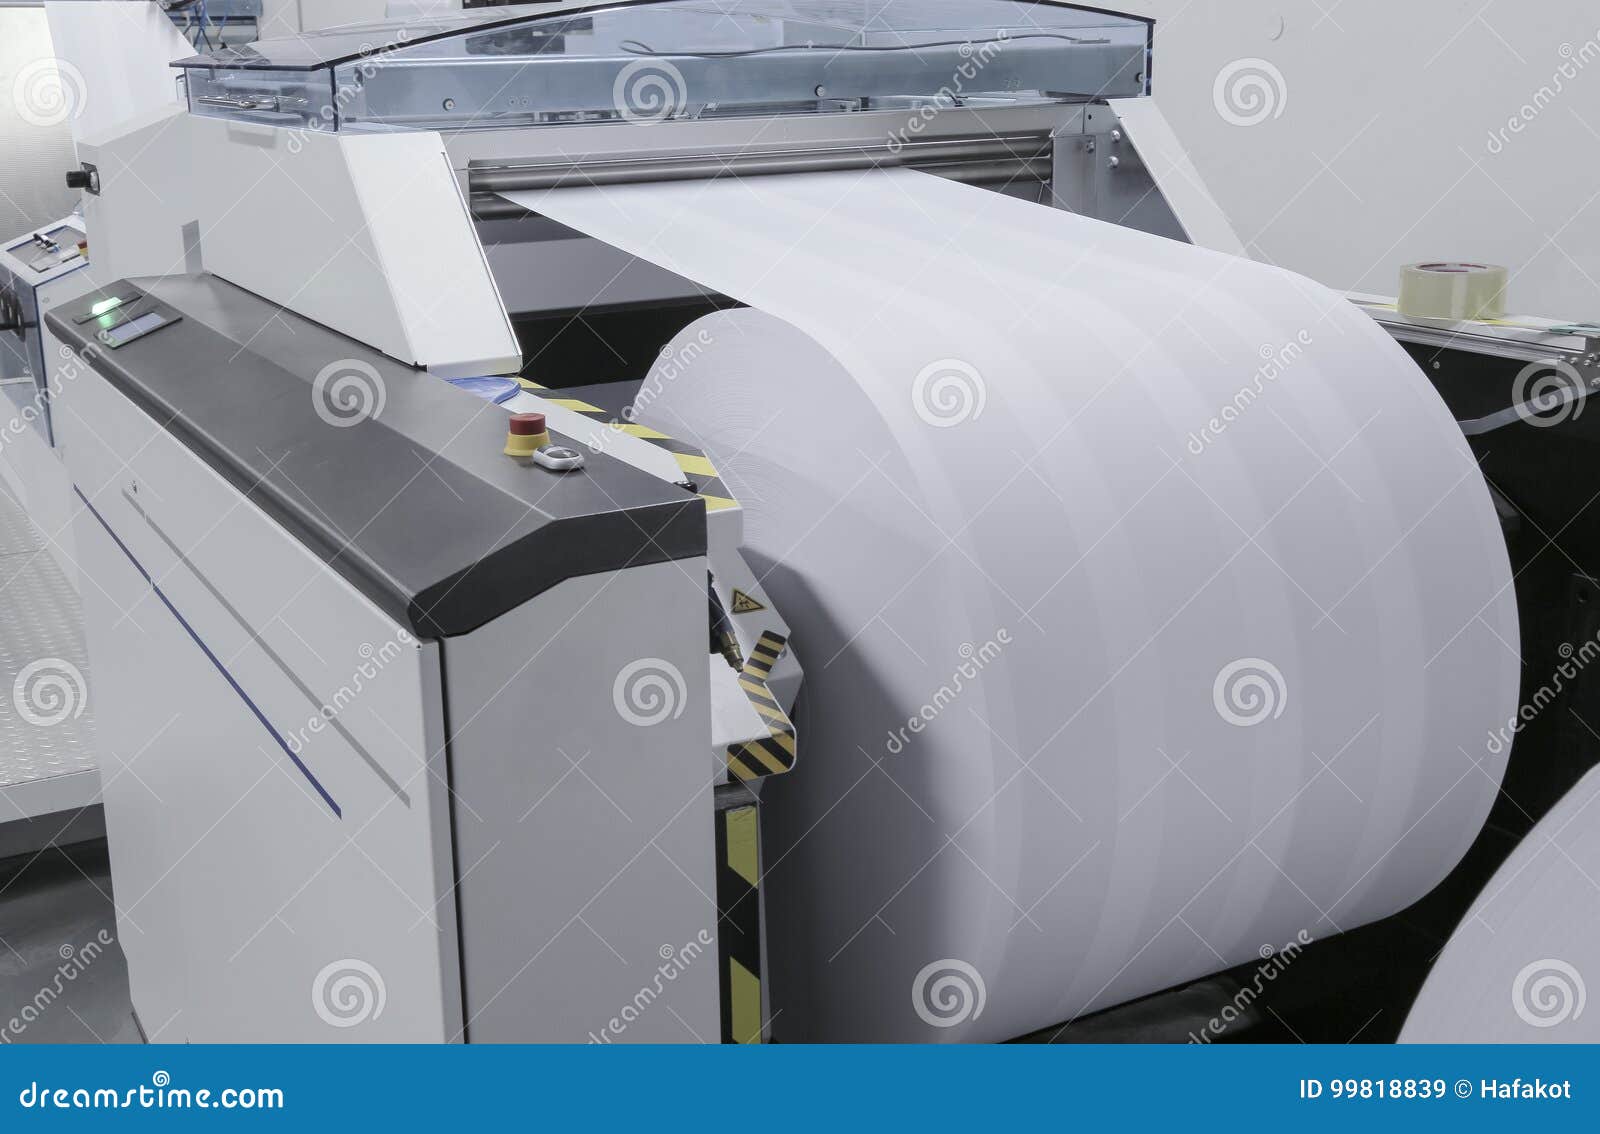 Large Paper Roll Installed in Printing Machine Stock Image - Image